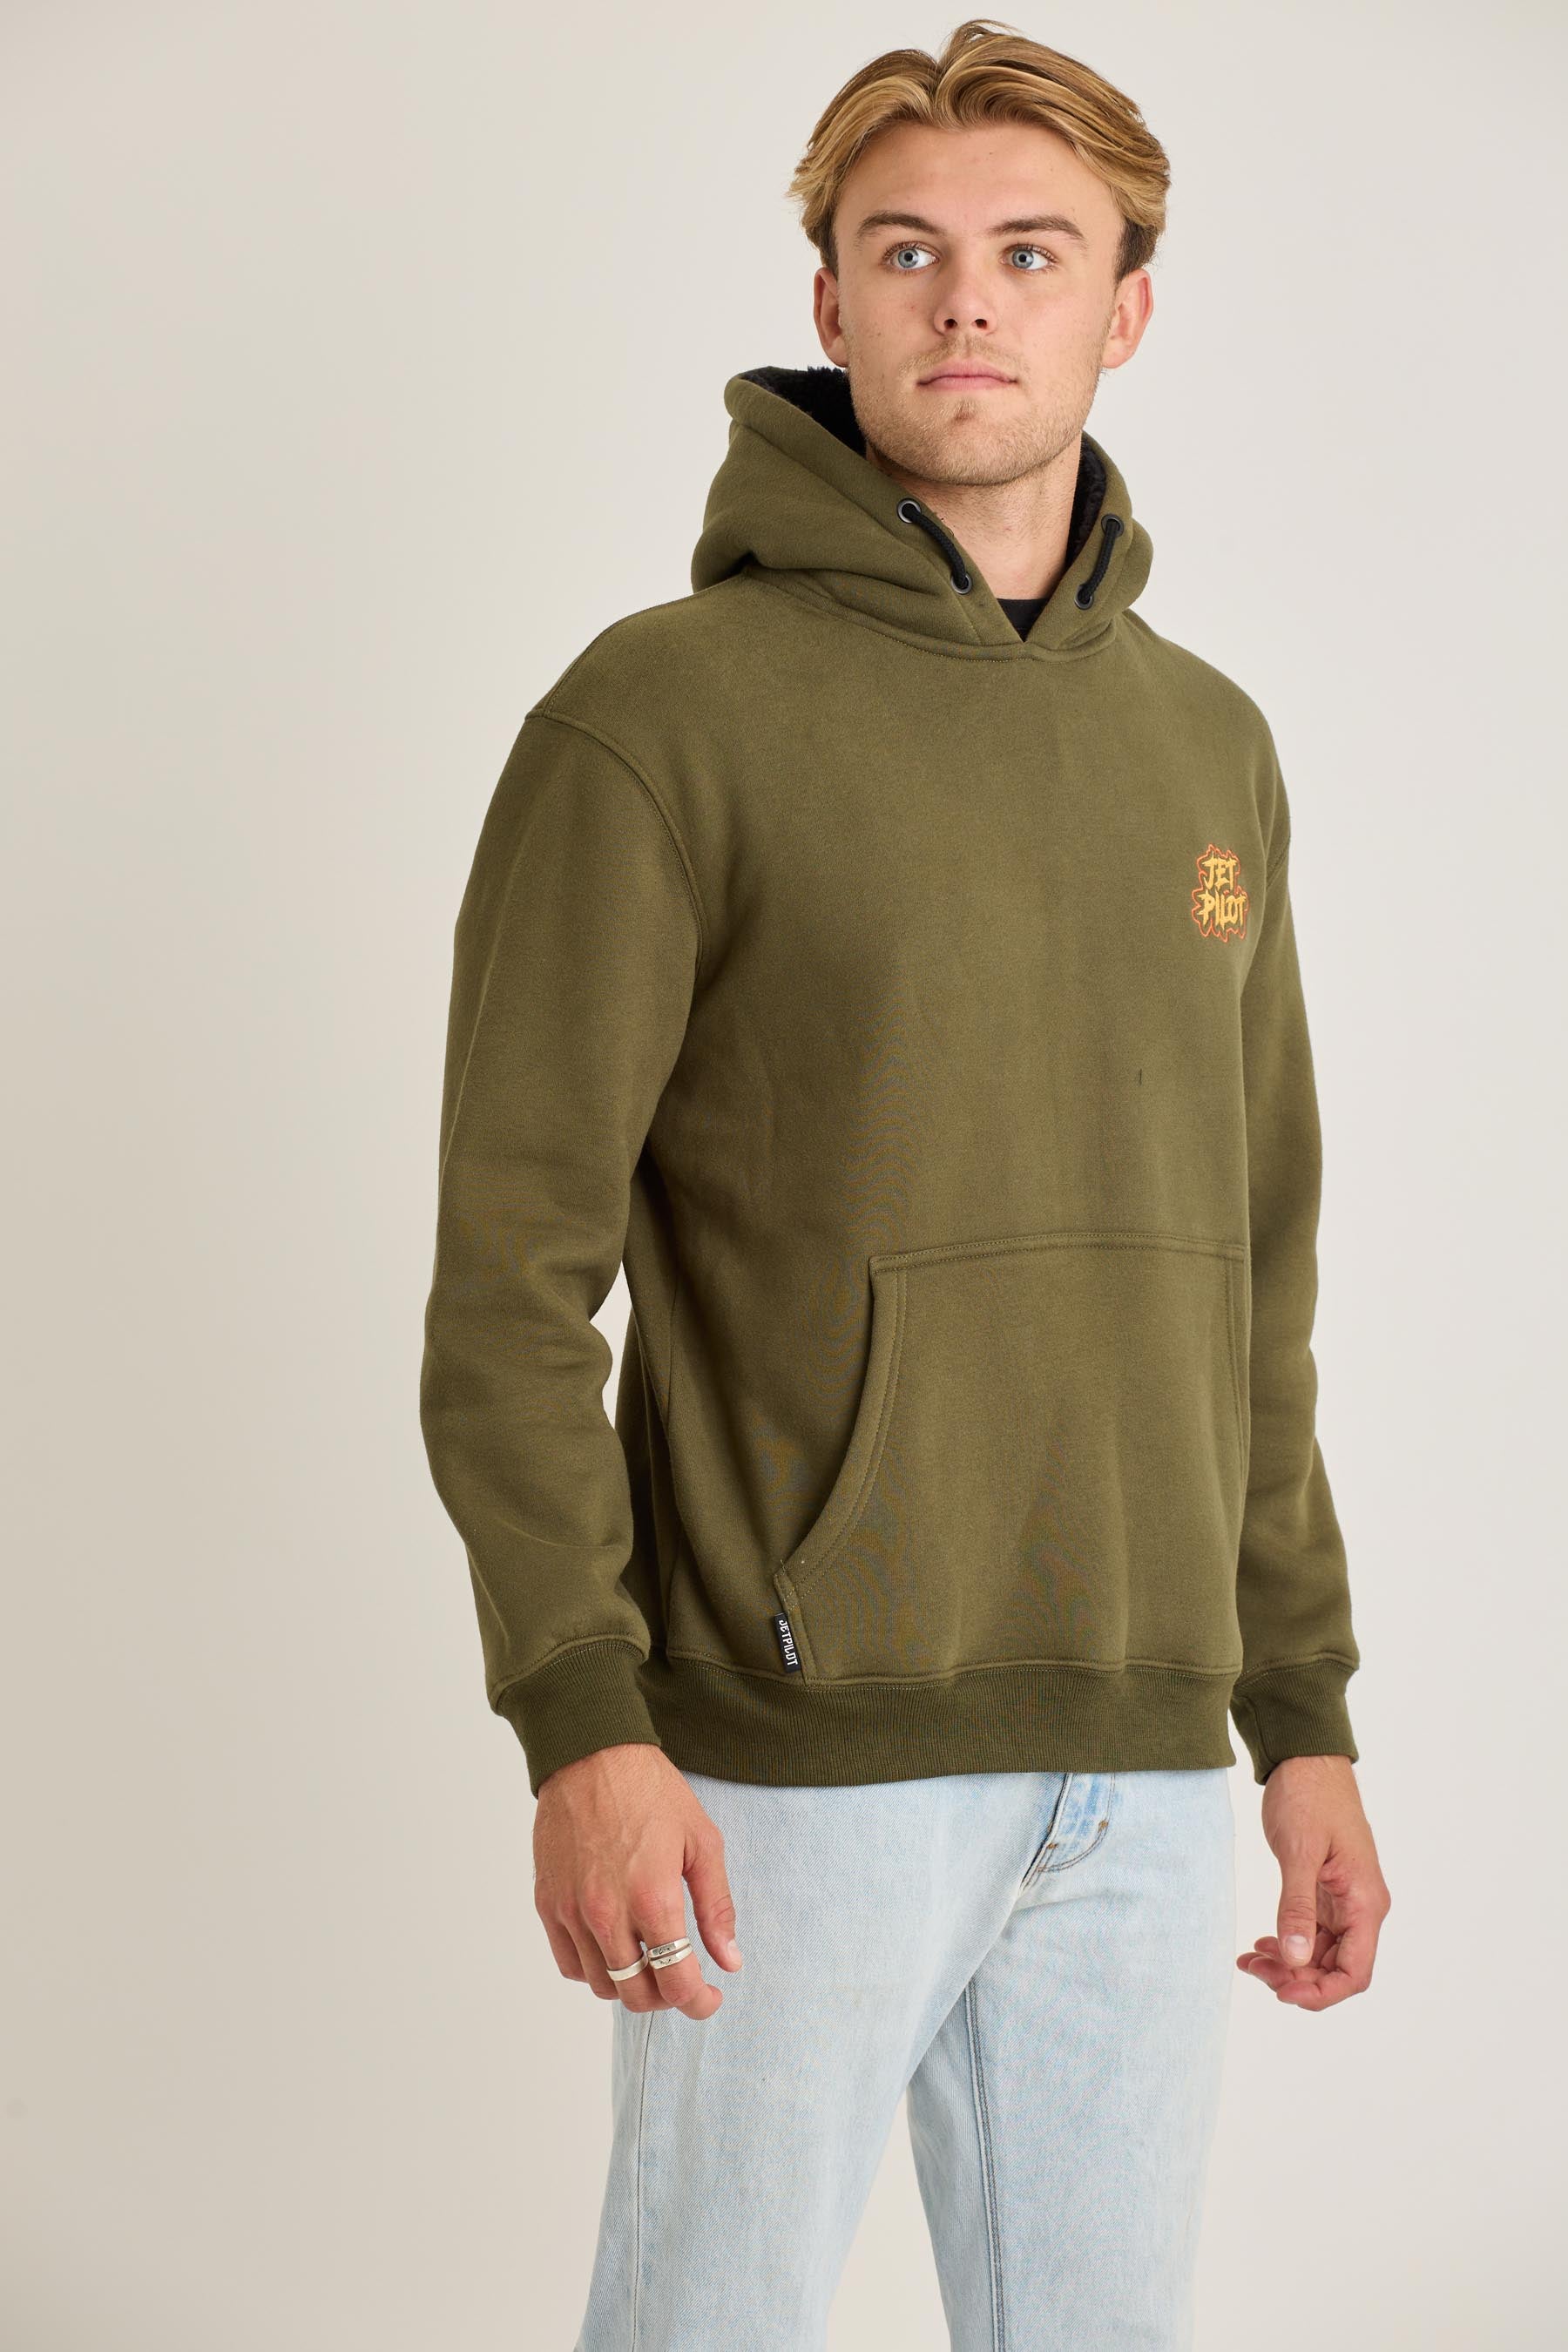 Jetpilot Yowie Sherpa Mens Pullover - Army